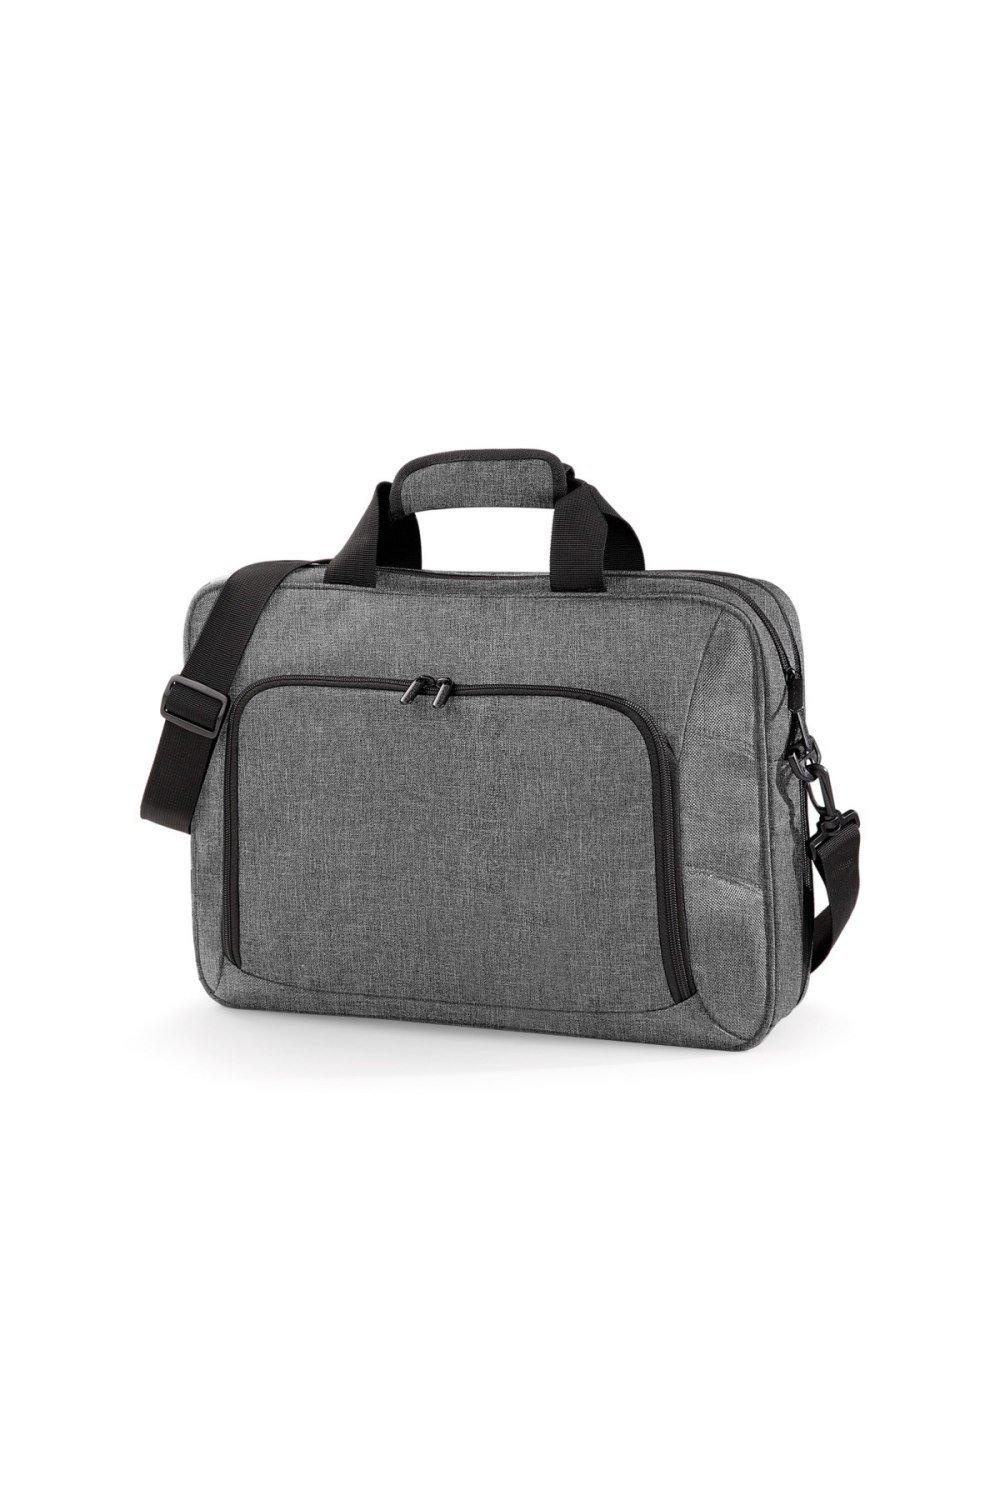 Executive Digital Office Bag (17inch Laptop Compatible) (Pack of 2)